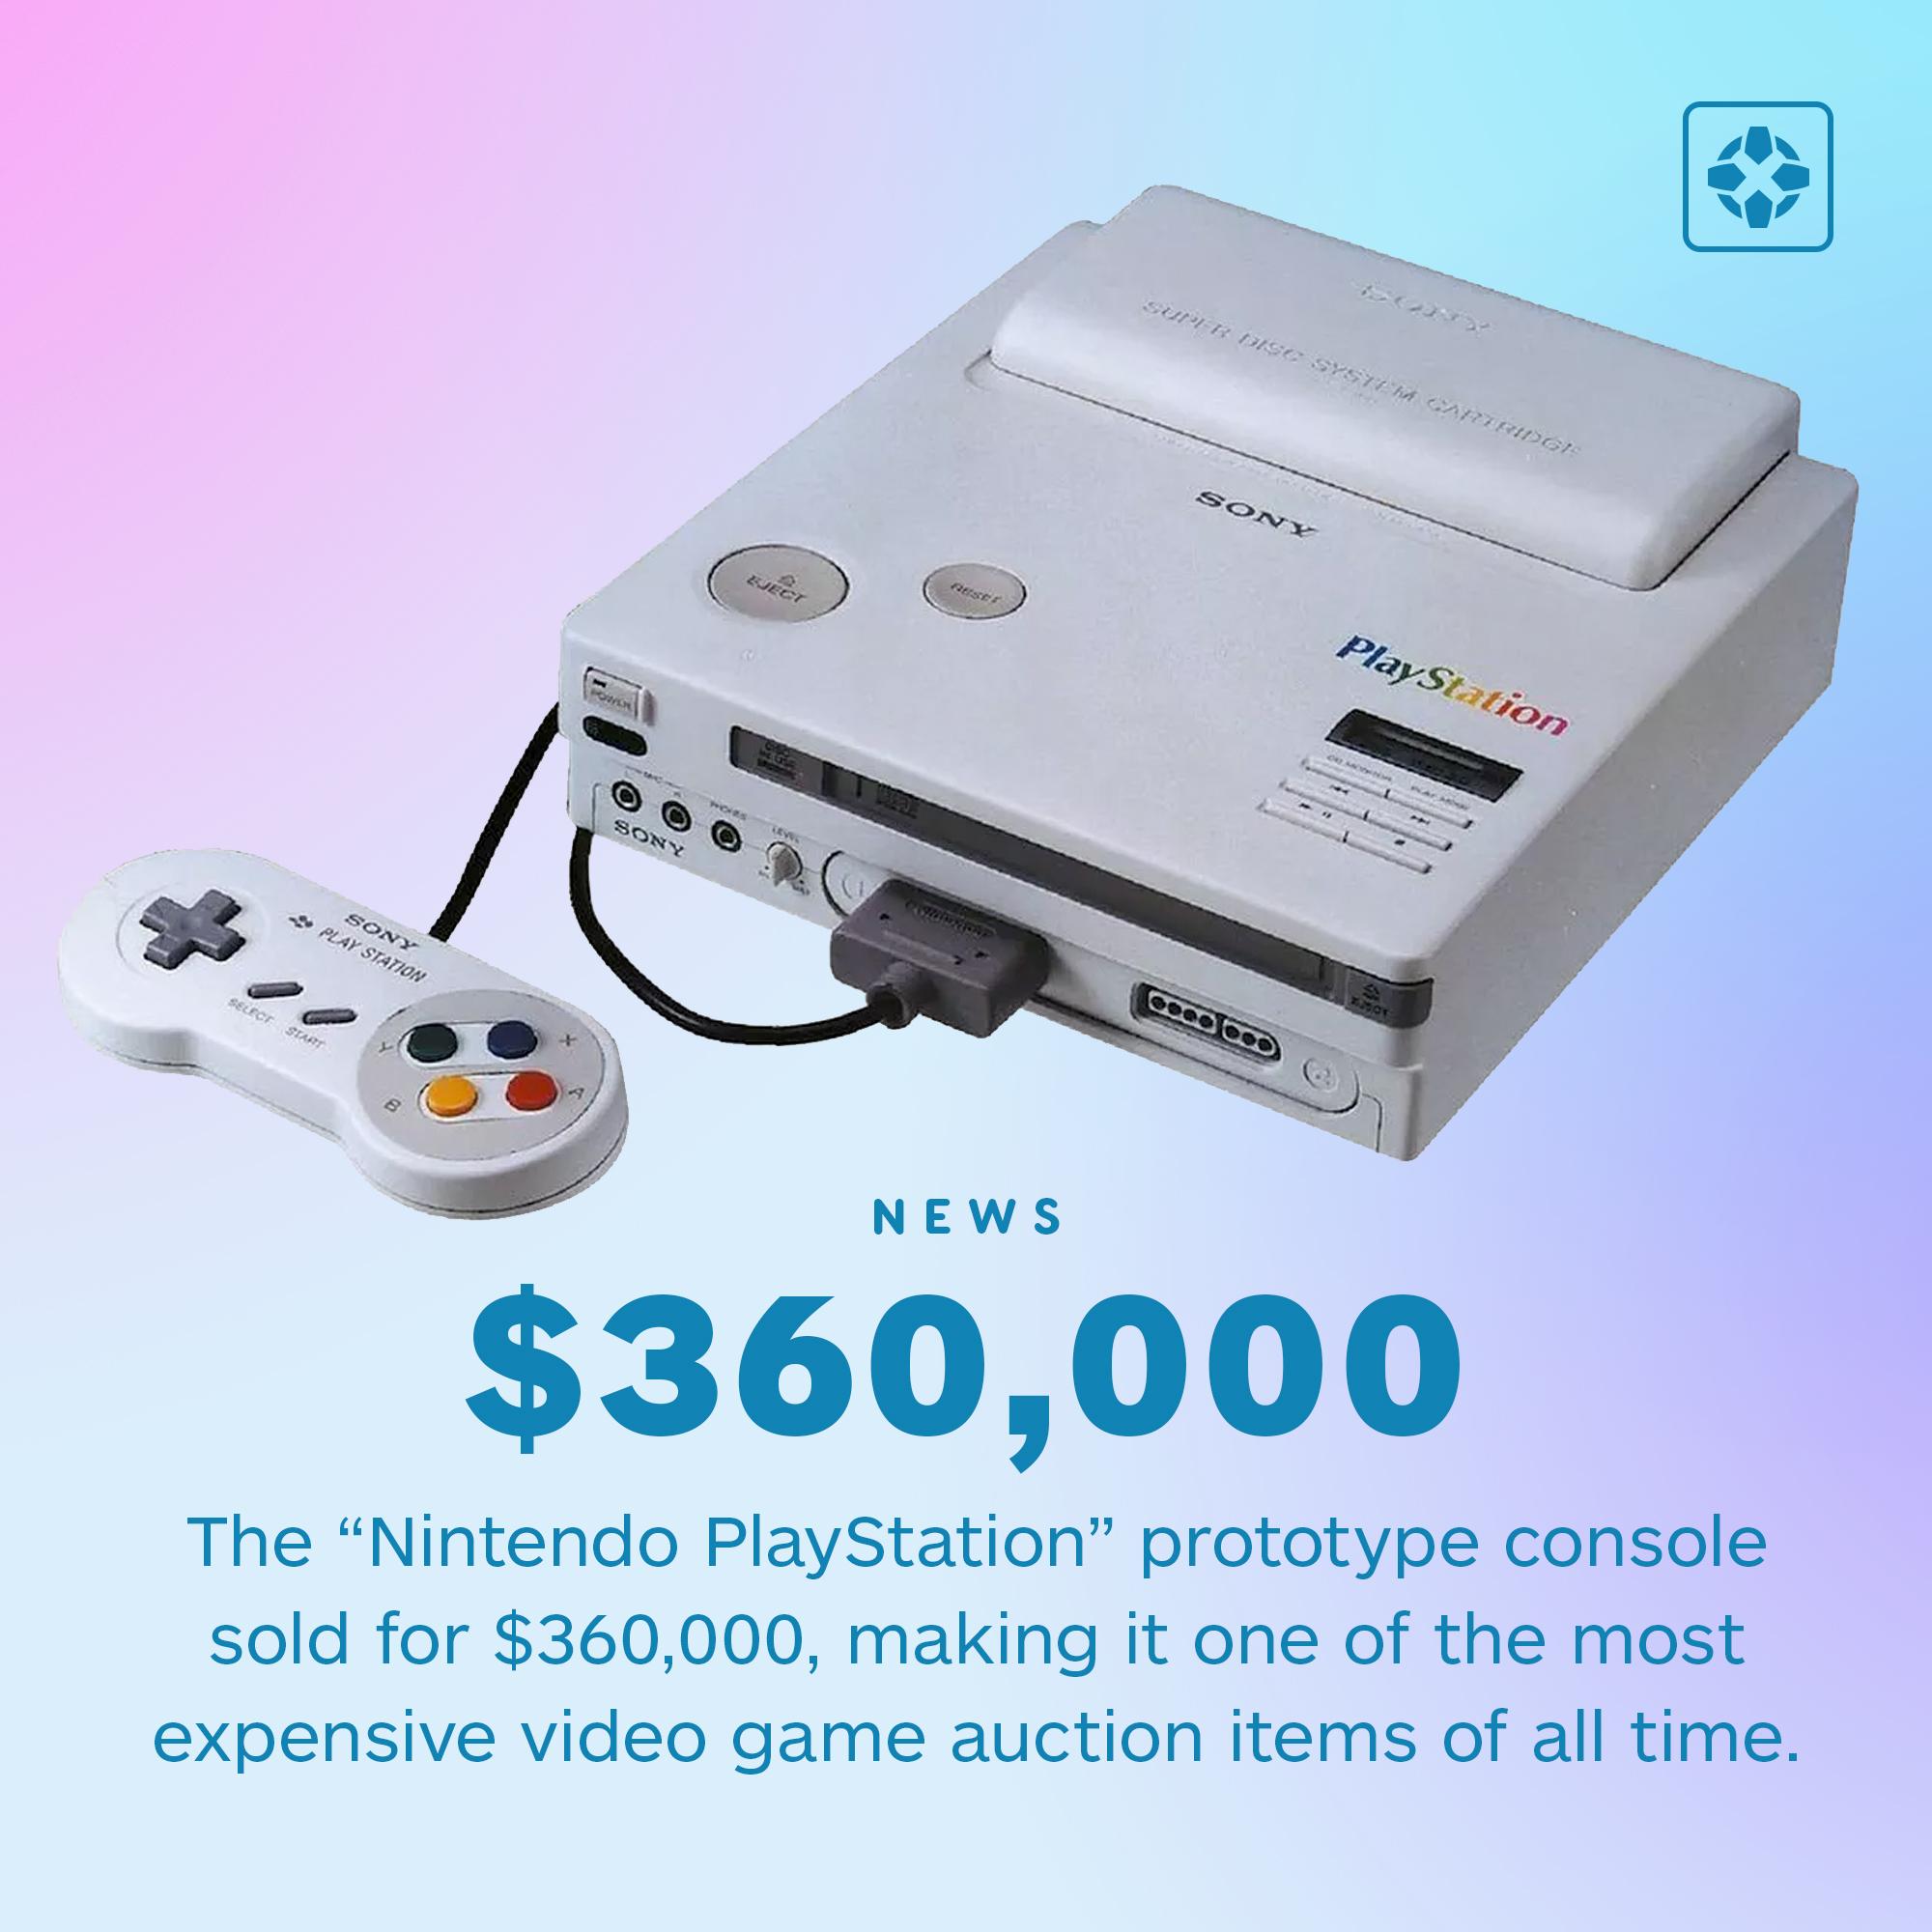 IGN on Twitter: "The “Nintendo PlayStation” prototype was developed as part of a potential partnership between Nintendo and to play cartridges and CD-based games: https://t.co/IsgJKh4PIt https://t.co/0JhJiZ2lfH" / Twitter